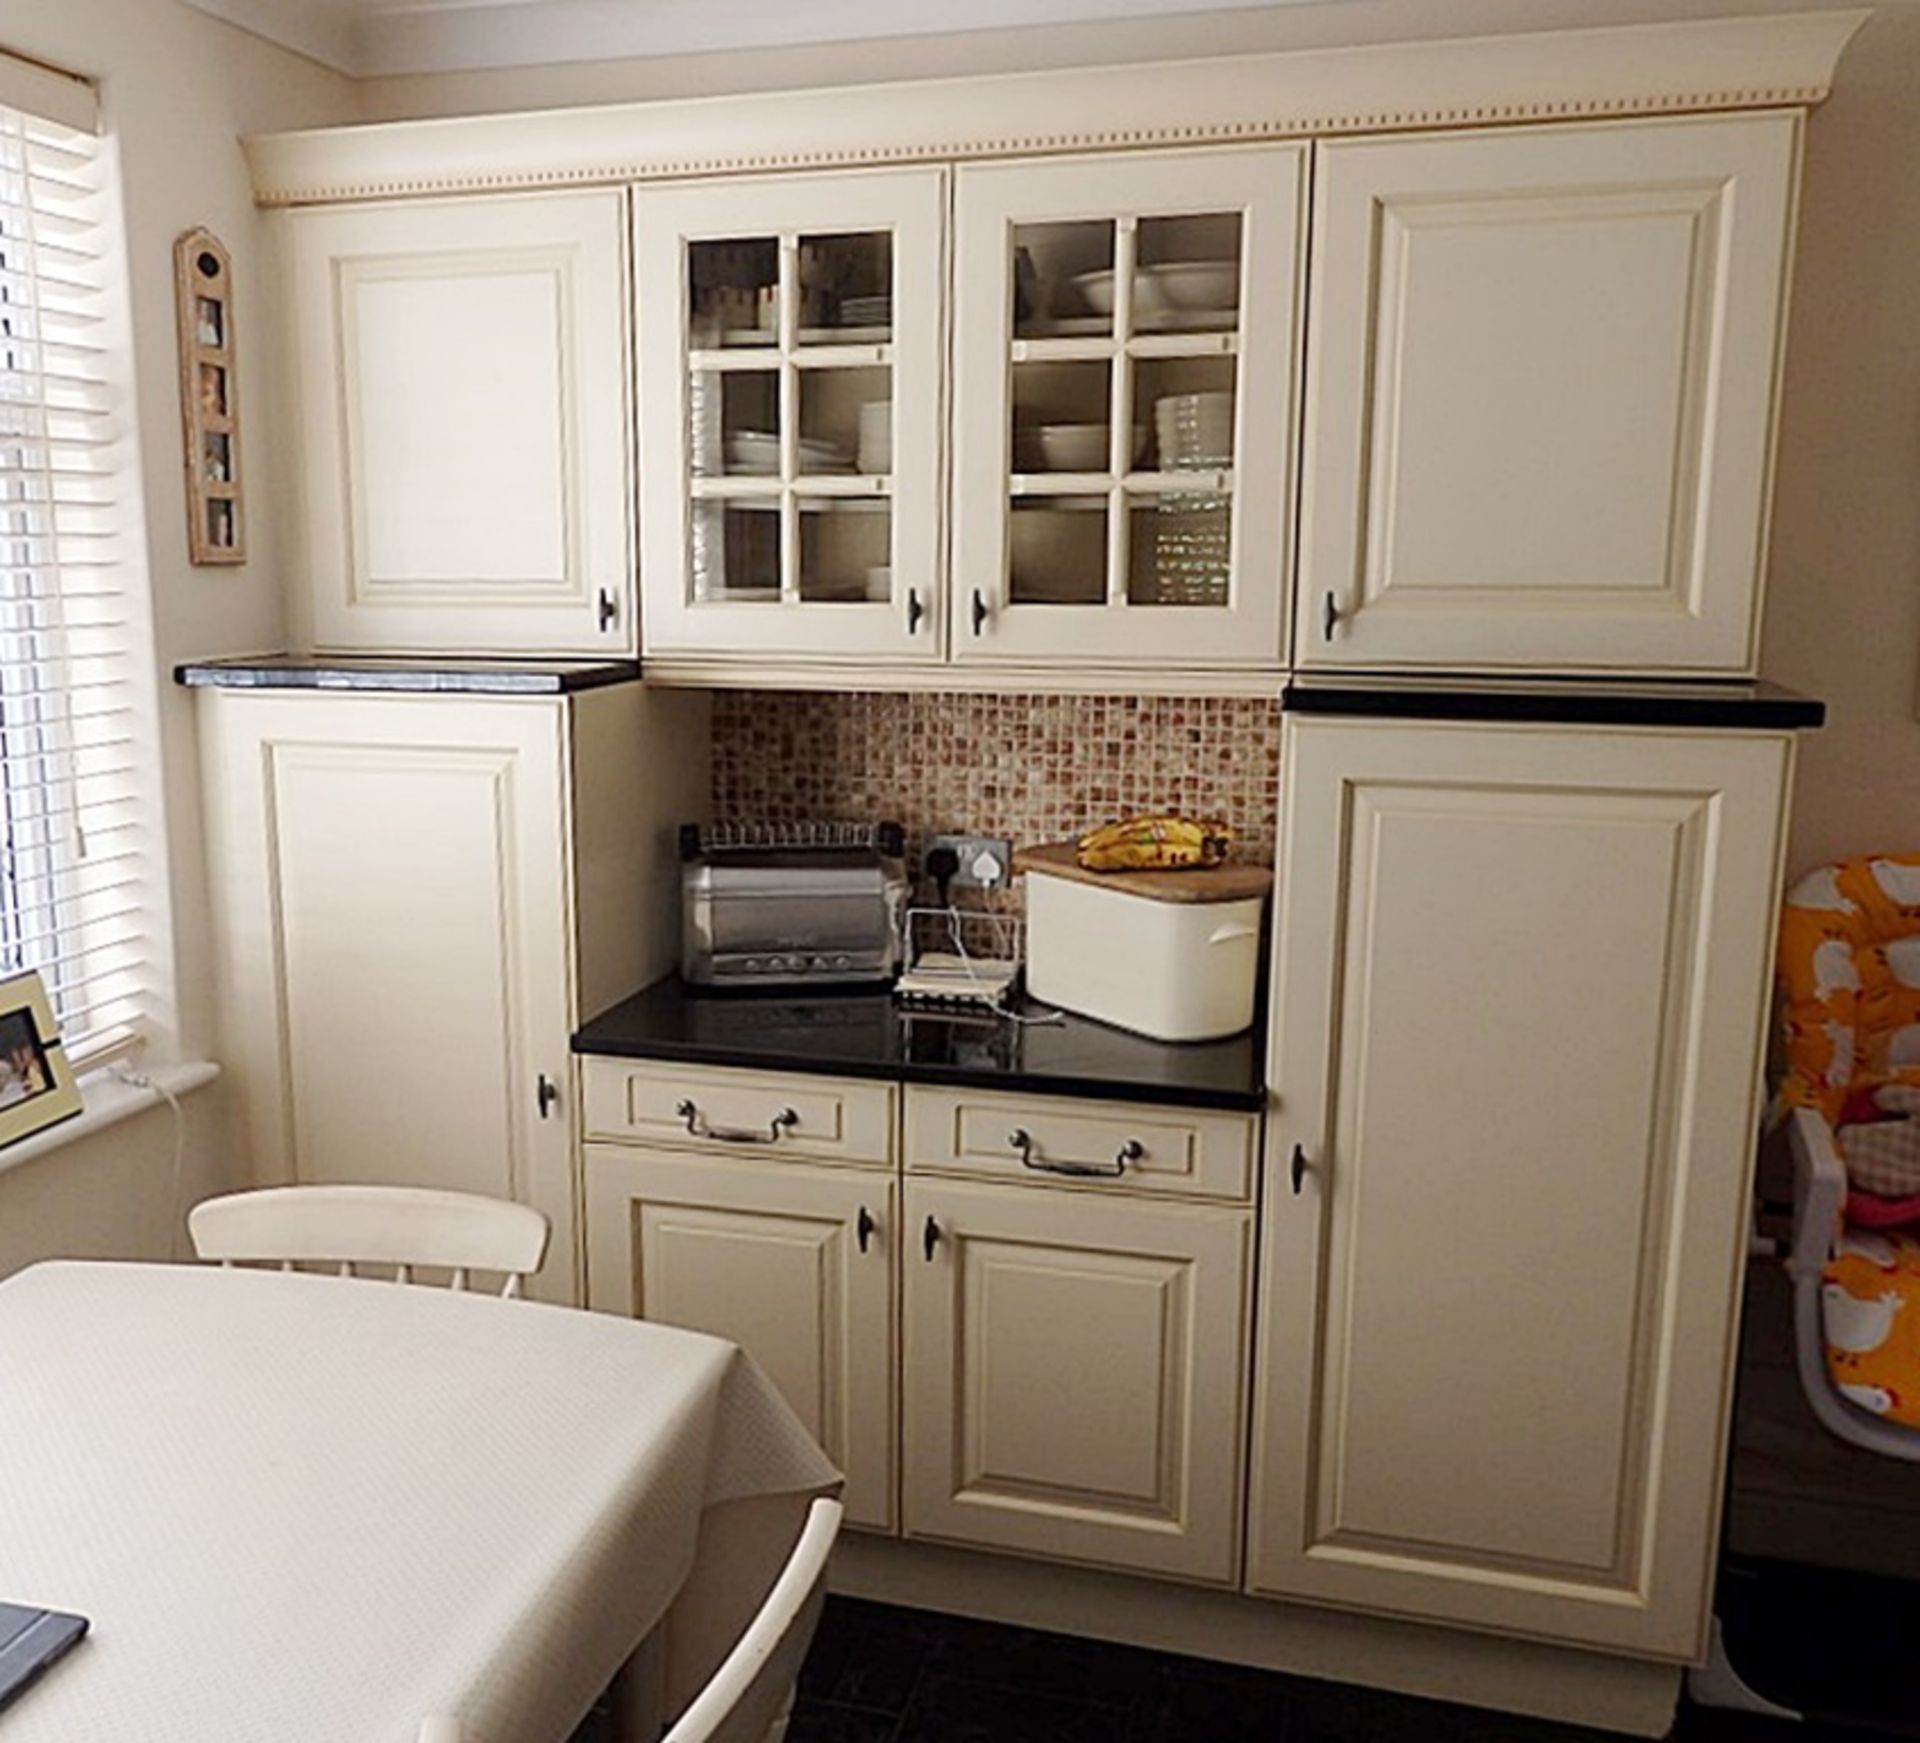 1 x Traditional Style Cream Kitchen With Luxurious Black Granite Worktops - Includes Freezer & - Image 12 of 31